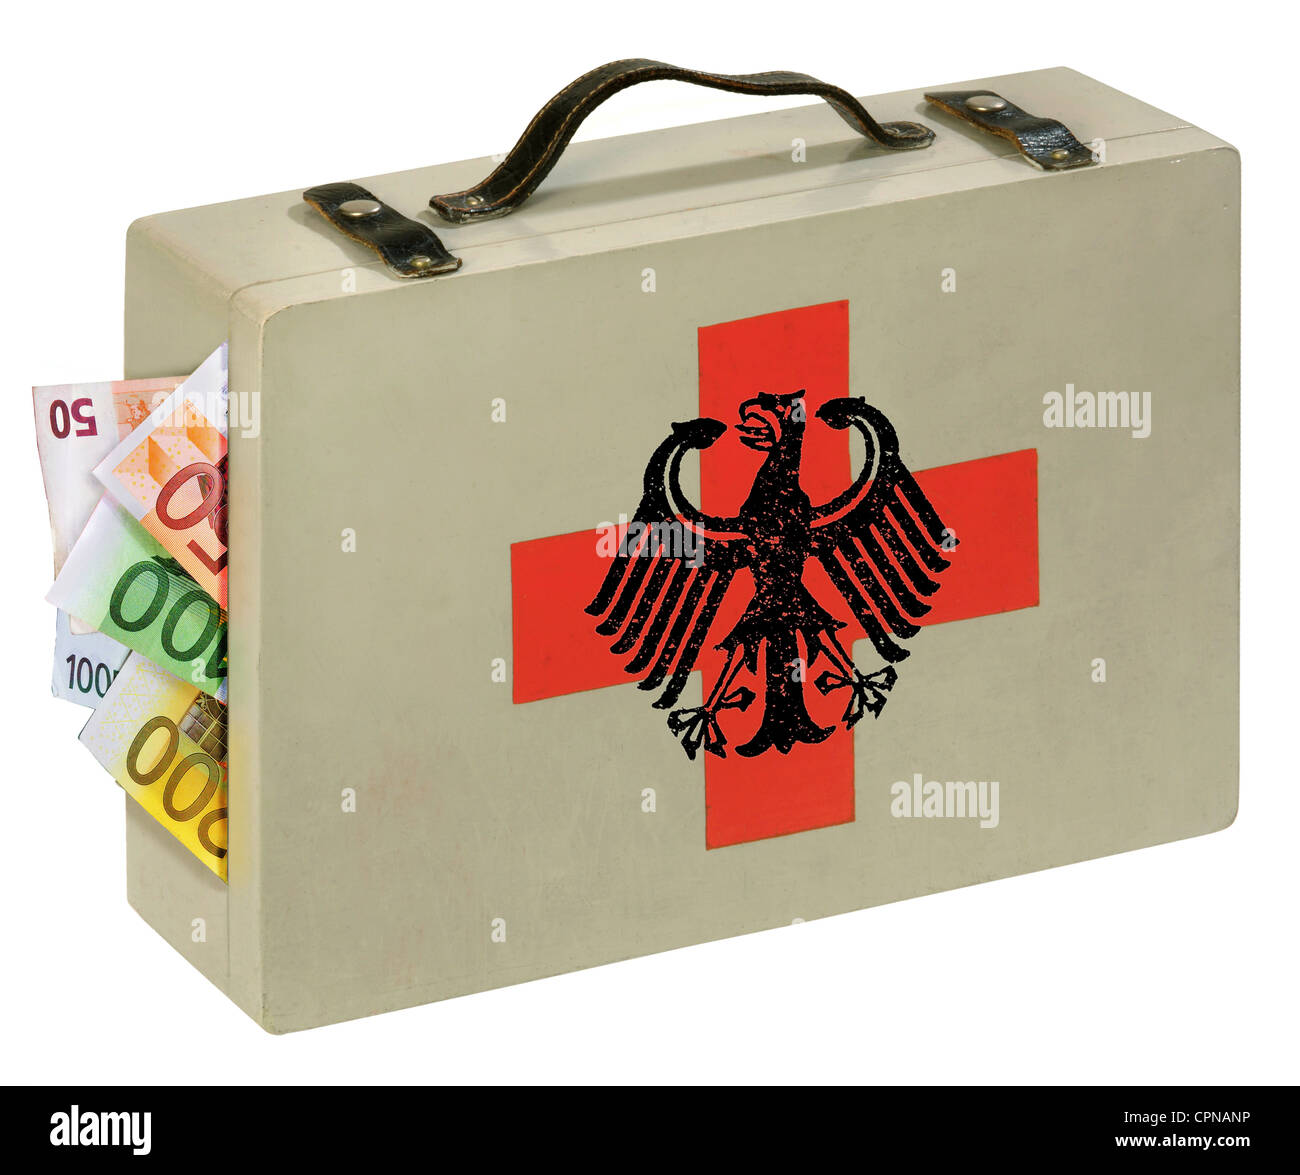 money / finances,financial rescue package,money suitcase with federal eagle and red cross,Germany,rescue funds,Federal Government,State,government,state-controled,state-run,relief funds,financial grants,finance package,grant-in-aid,grants-in-aid,financing,private funding,governmental funding,financial crisis,fiscal crisis,financial crises,fiscal crises,credit crunch,credit crisis,banking crisis,economic crisis,economic crunch,economic crises,economic crunches,car crisis,crises,budgets,federal budget,household crisis,budget cris,Additional-Rights-Clearences-Not Available Stock Photo